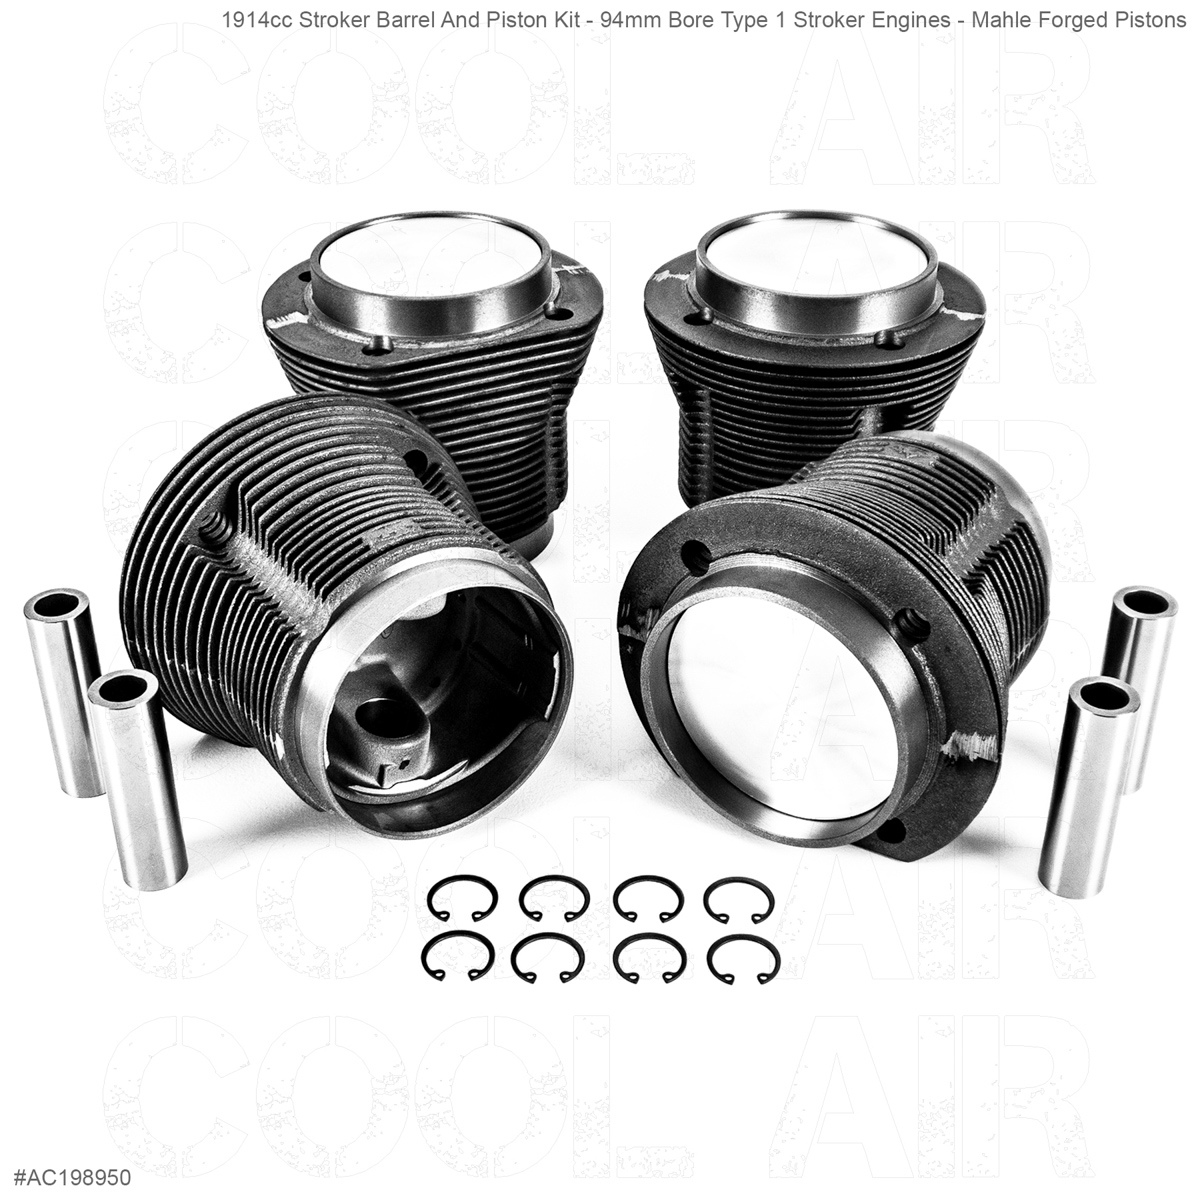 1914cc Stroker Barrel And Piston Kit - 94mm Bore Type 1 Stroker Engines - Mahle Forged Pistons